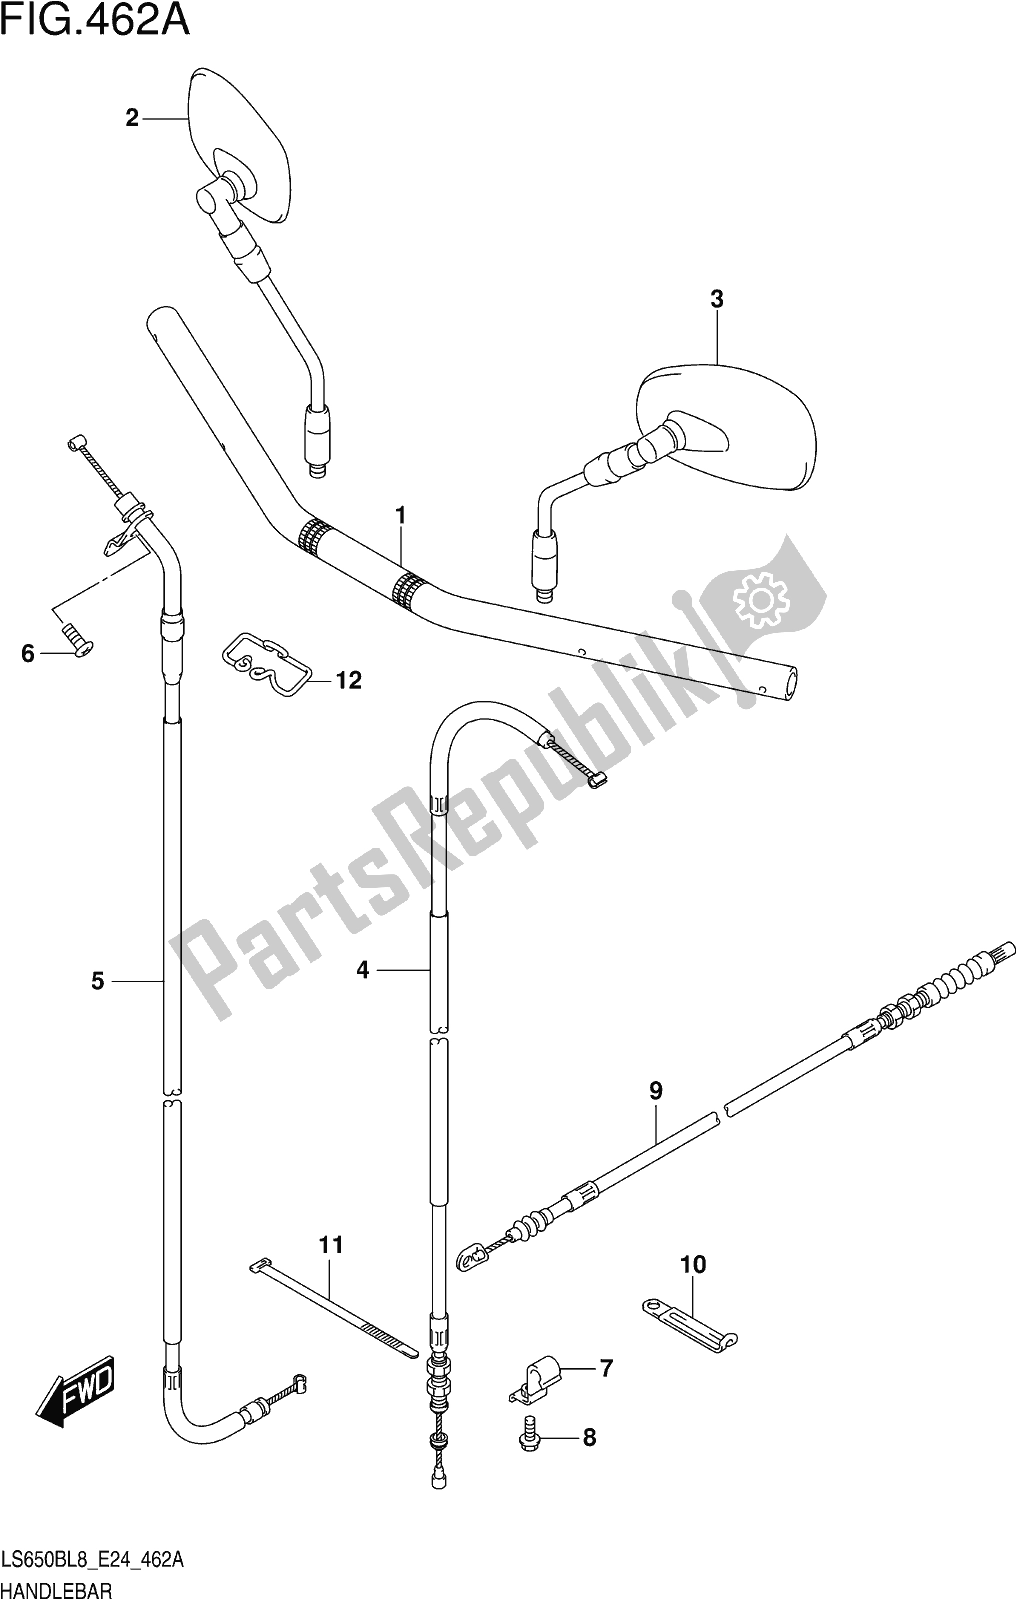 All parts for the Fig. 462a Handlebar of the Suzuki LS 650B 2018